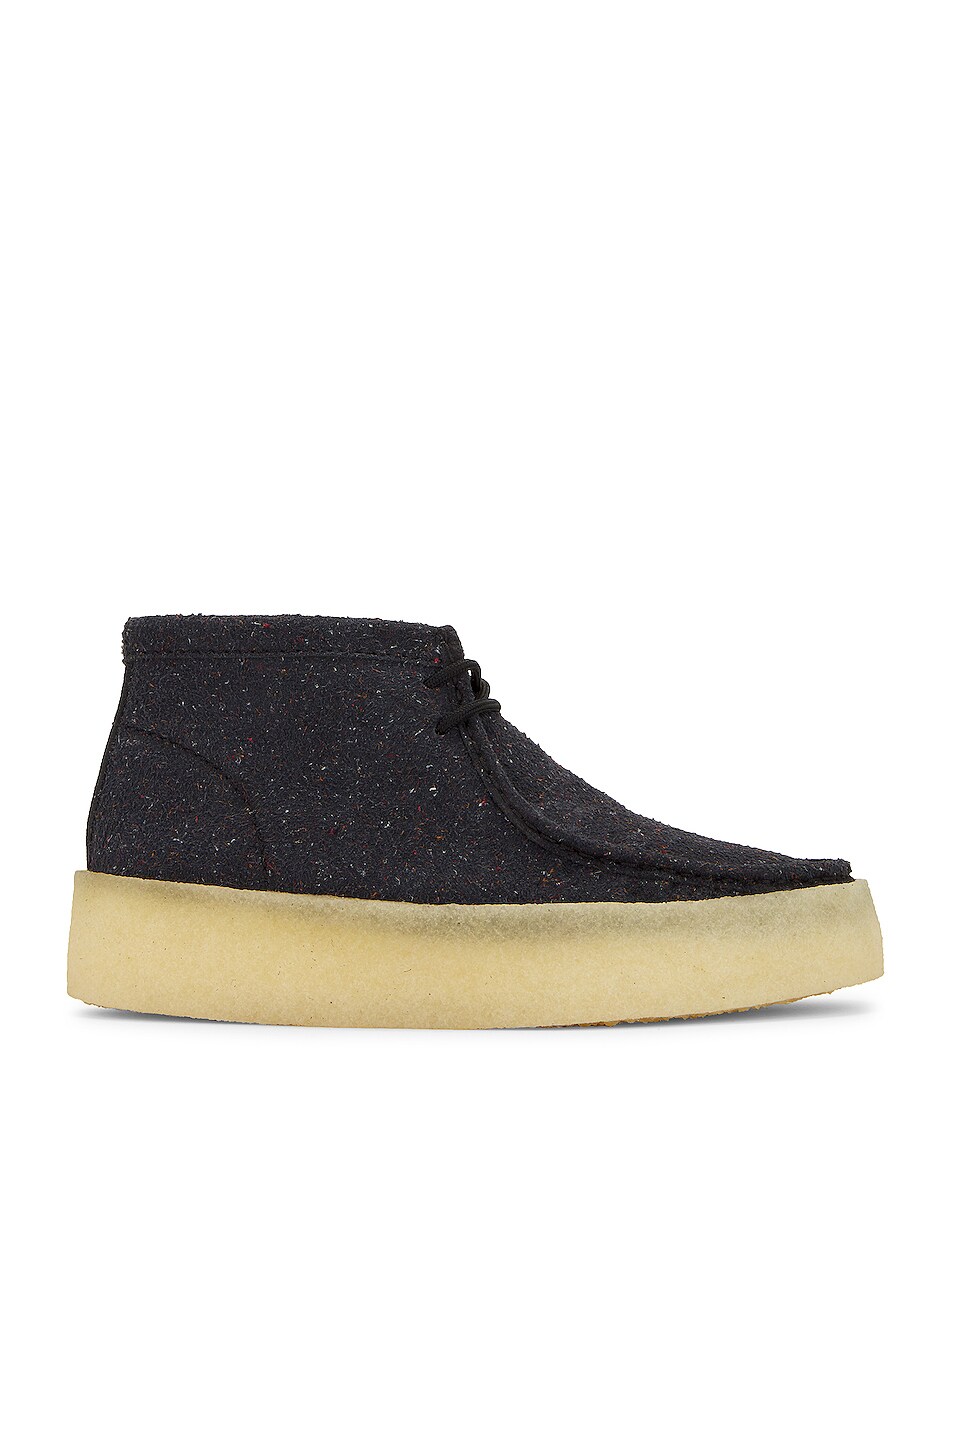 Image 1 of Clarks Wallabee Cup Boot in Black